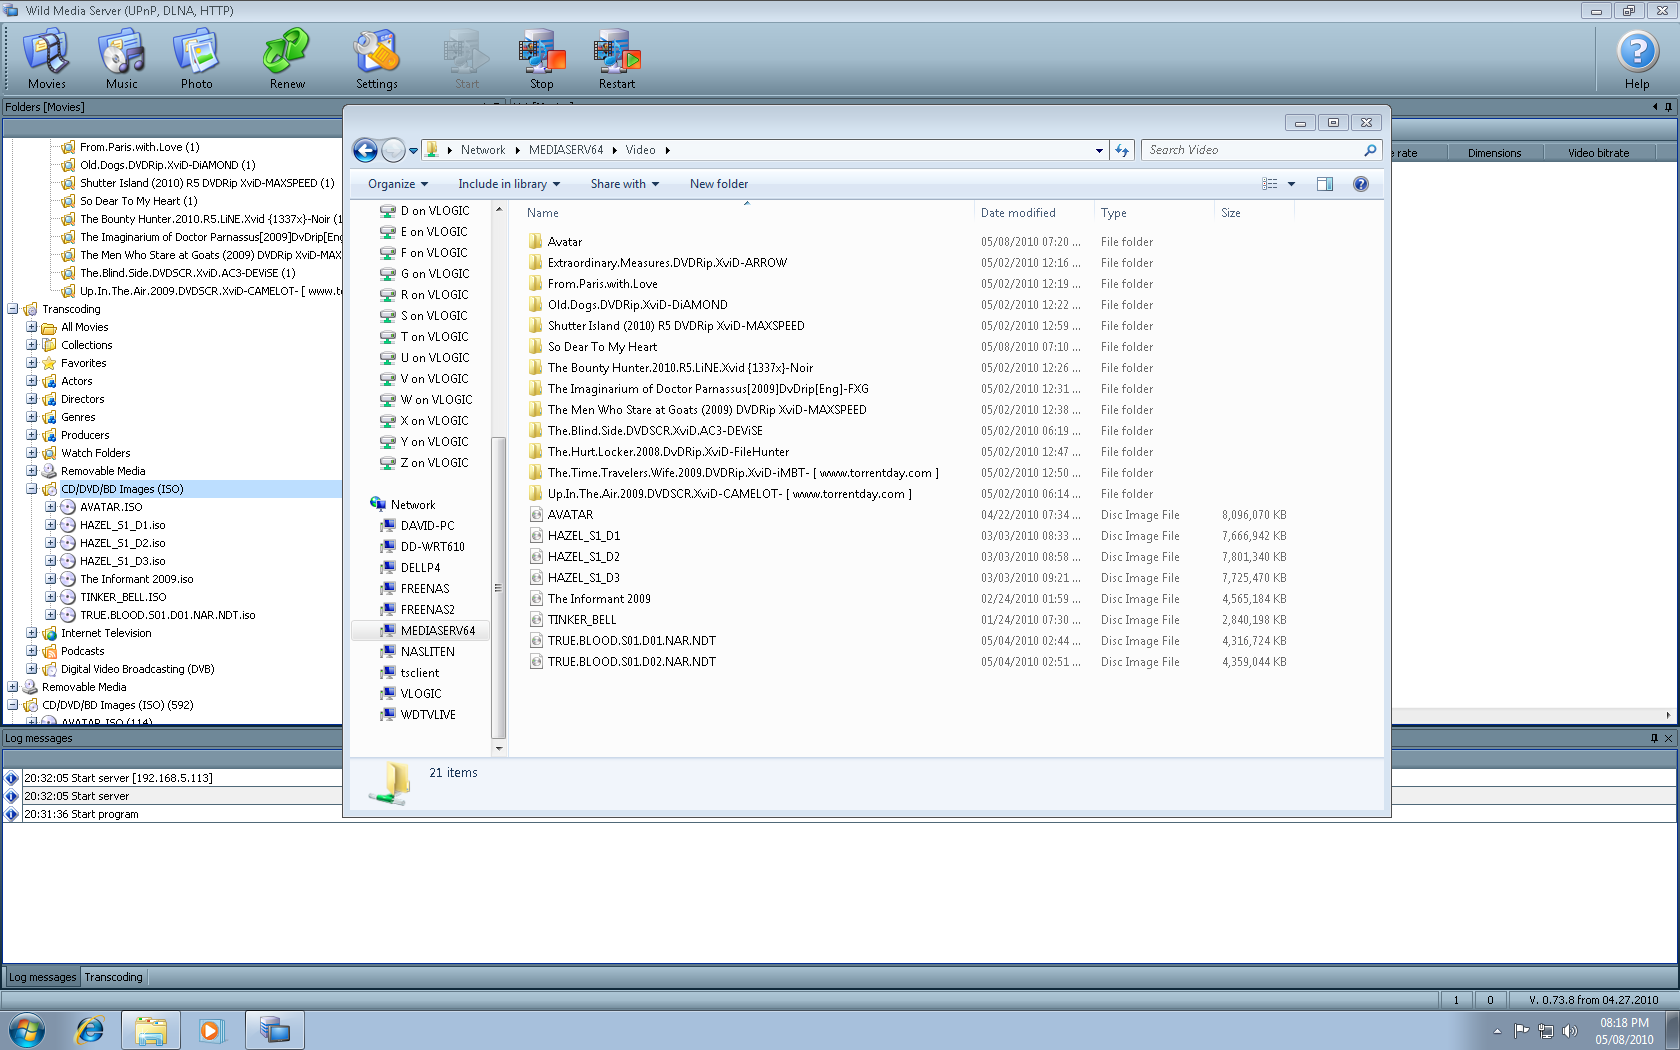 after moving trueblood disk 2 to the watch folder.  WMS still has not detected it, nor will it with a stop and restart